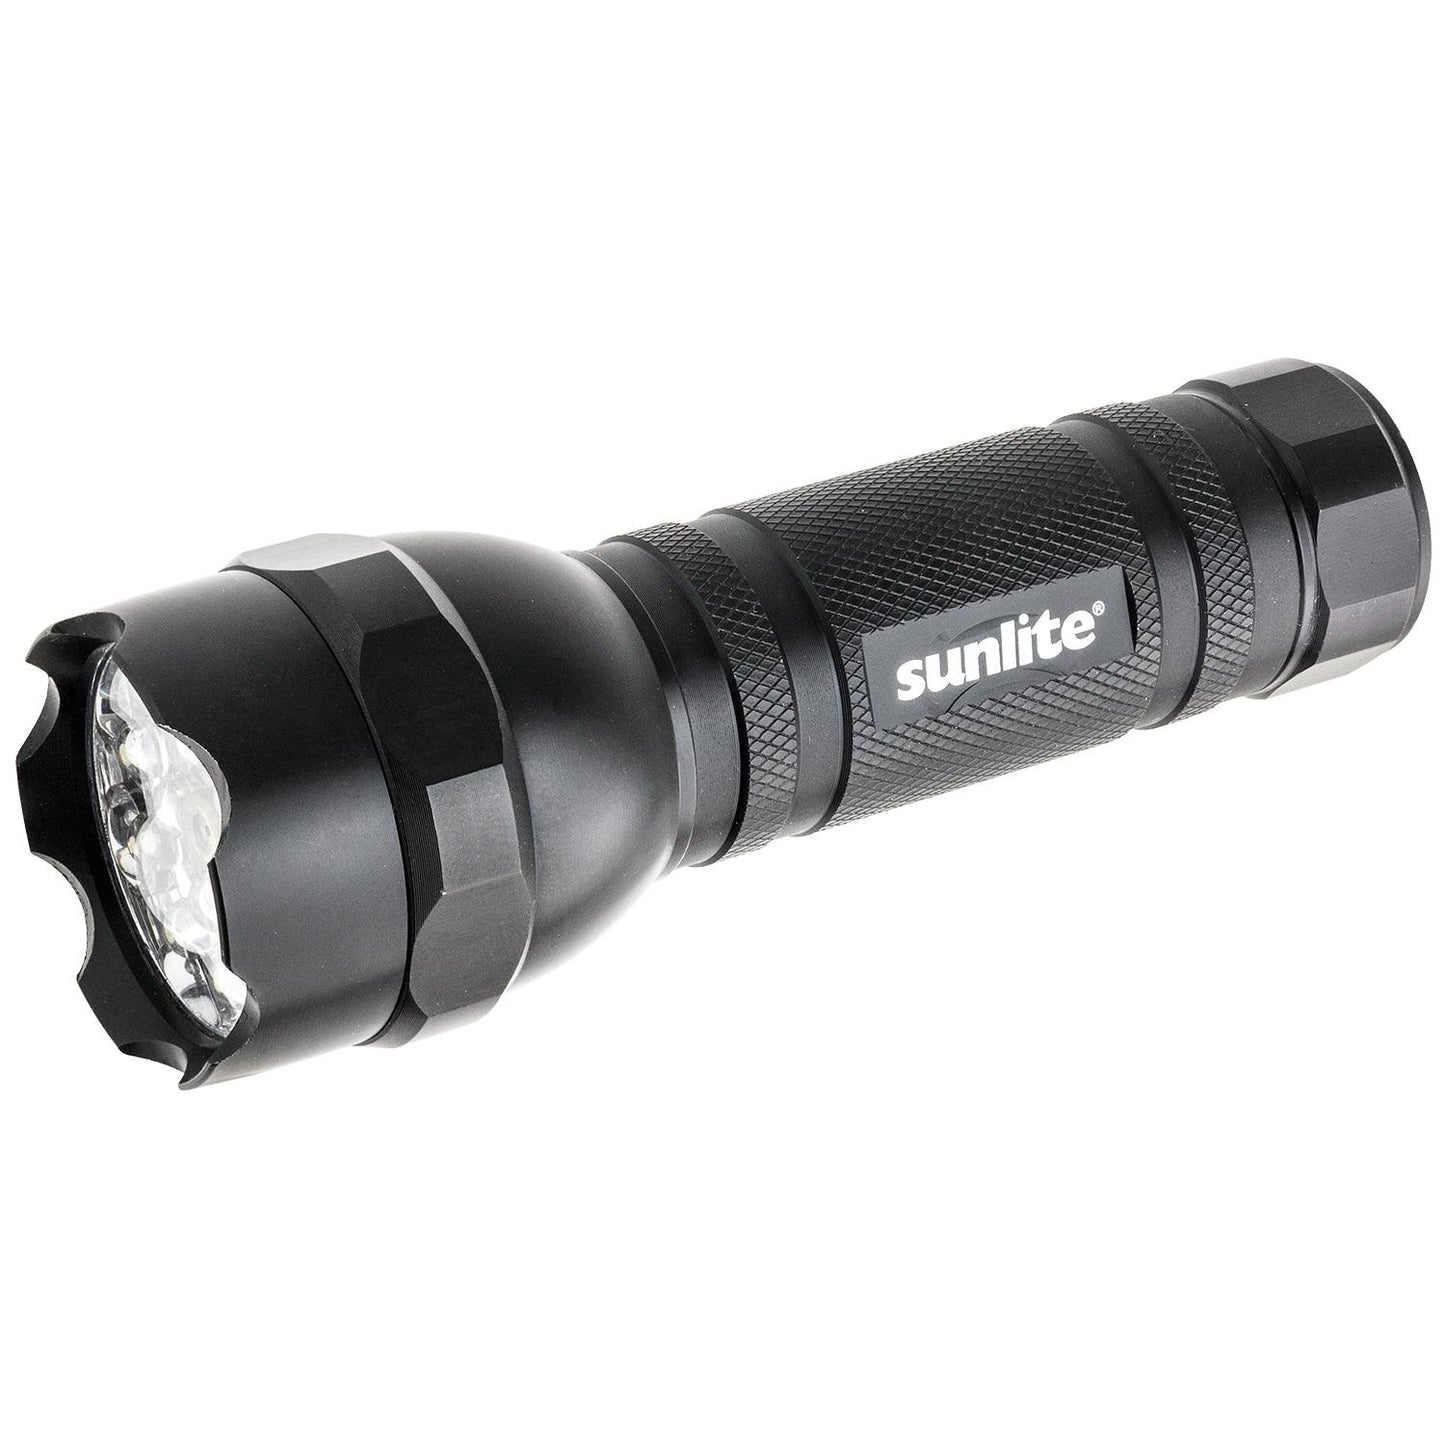 Sunlite 51003-SU LED Outdoor Tactical Flashlight, 4-Modes, Flashlight, Strobe, Green Light, Presentation Pointer, 3-AAA Batteries Included, Water Resistant